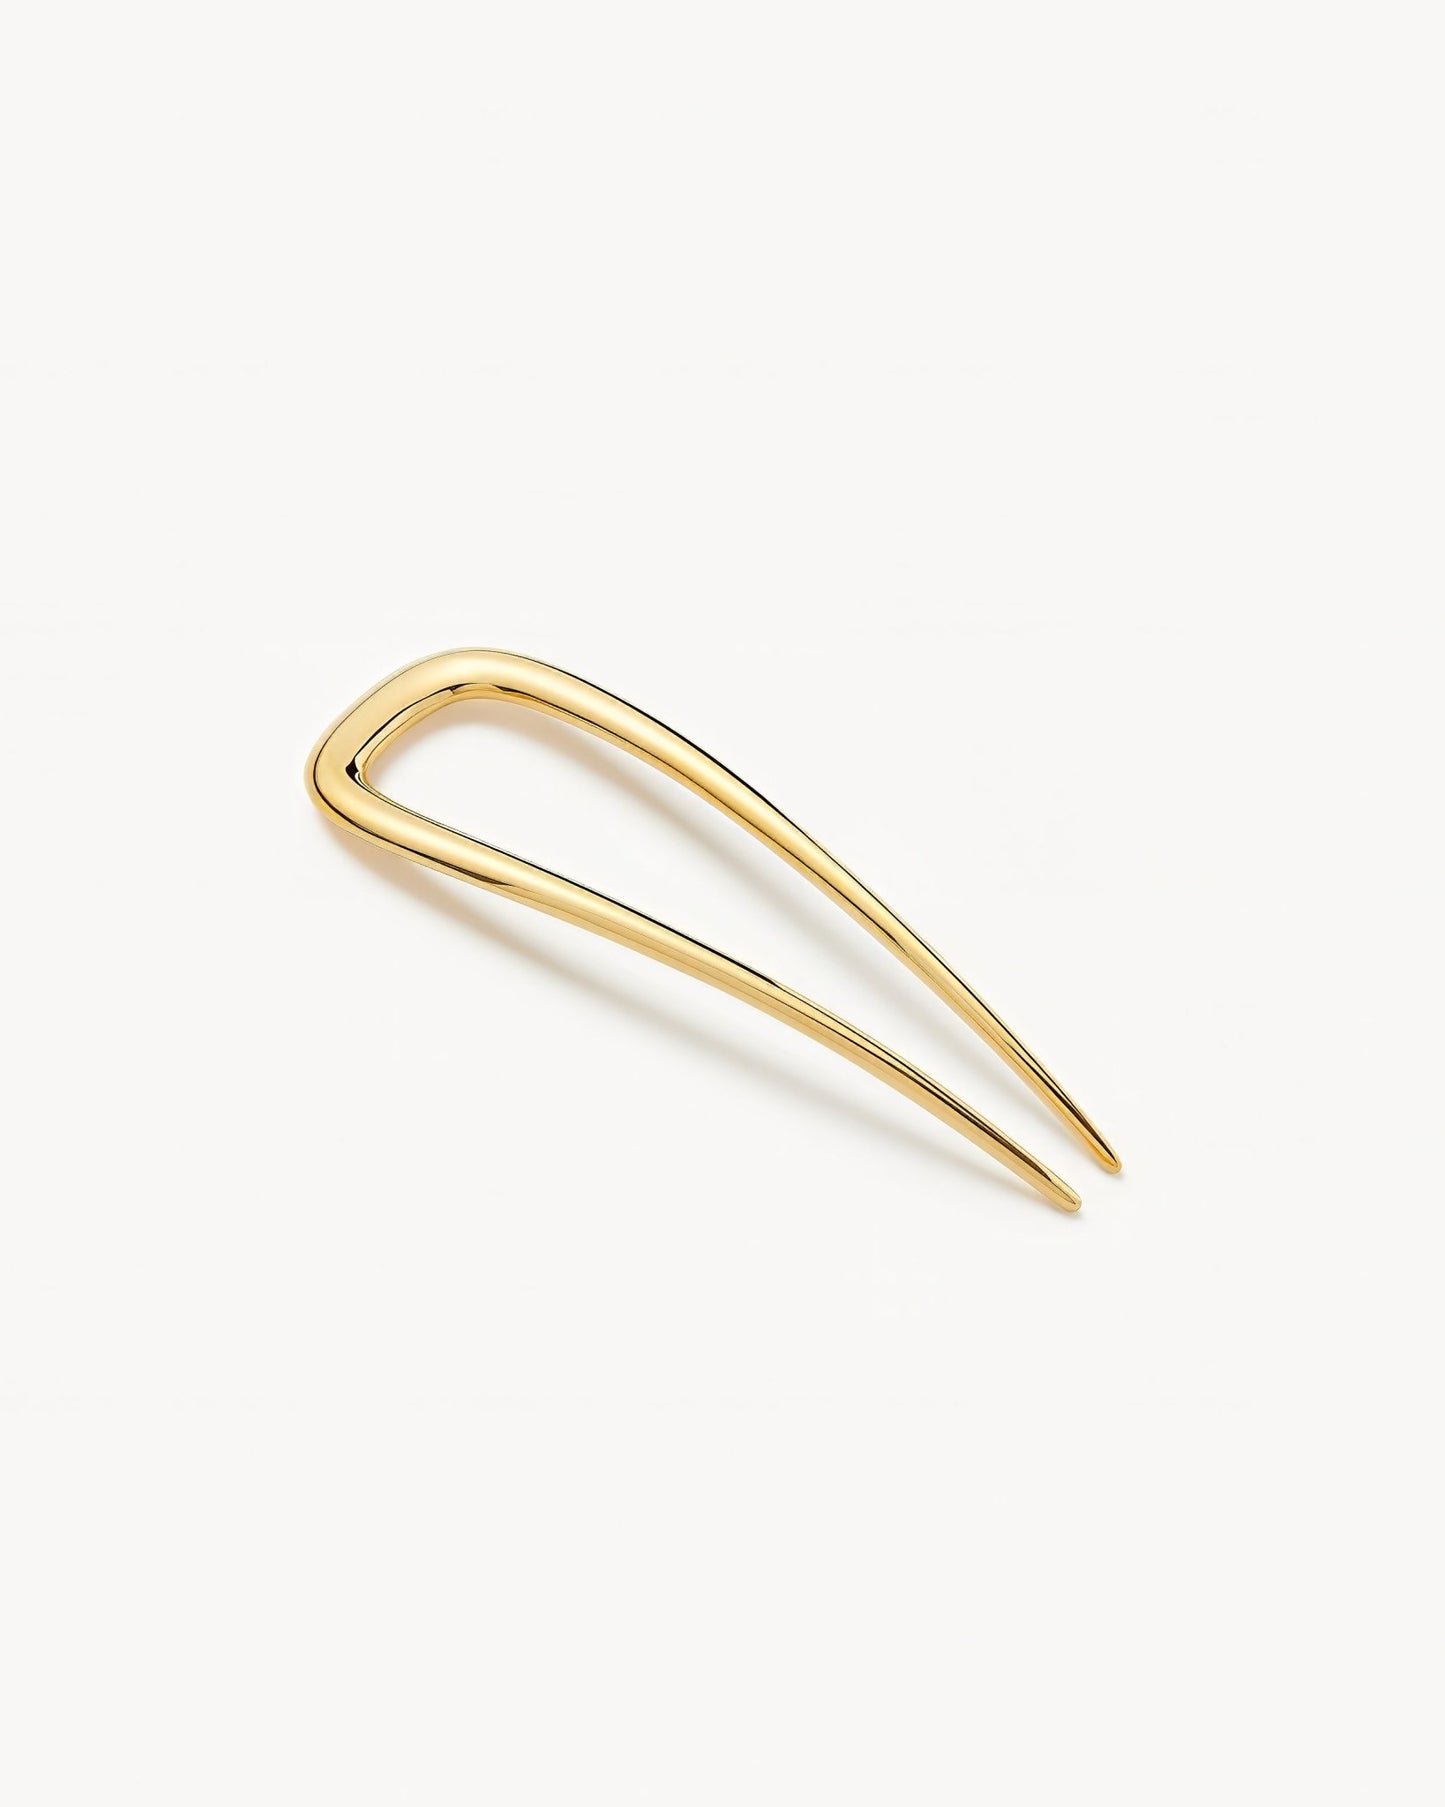 Petite Oval French Hair Pin in Gold